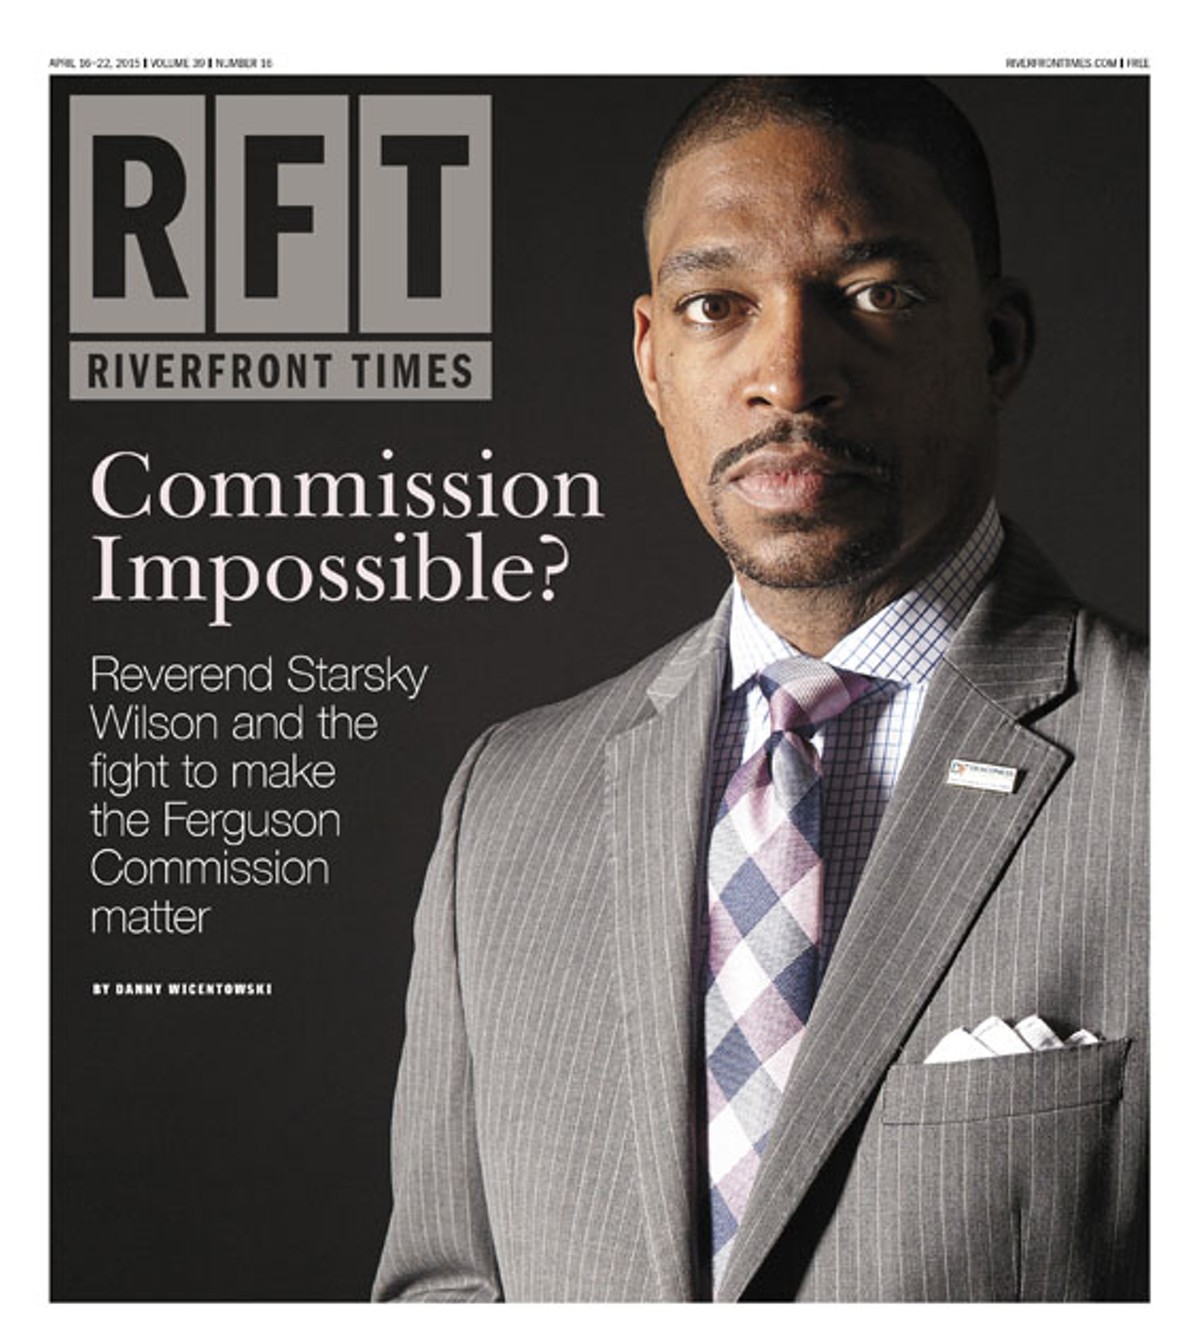 The Cover of the April 16 Print Edition